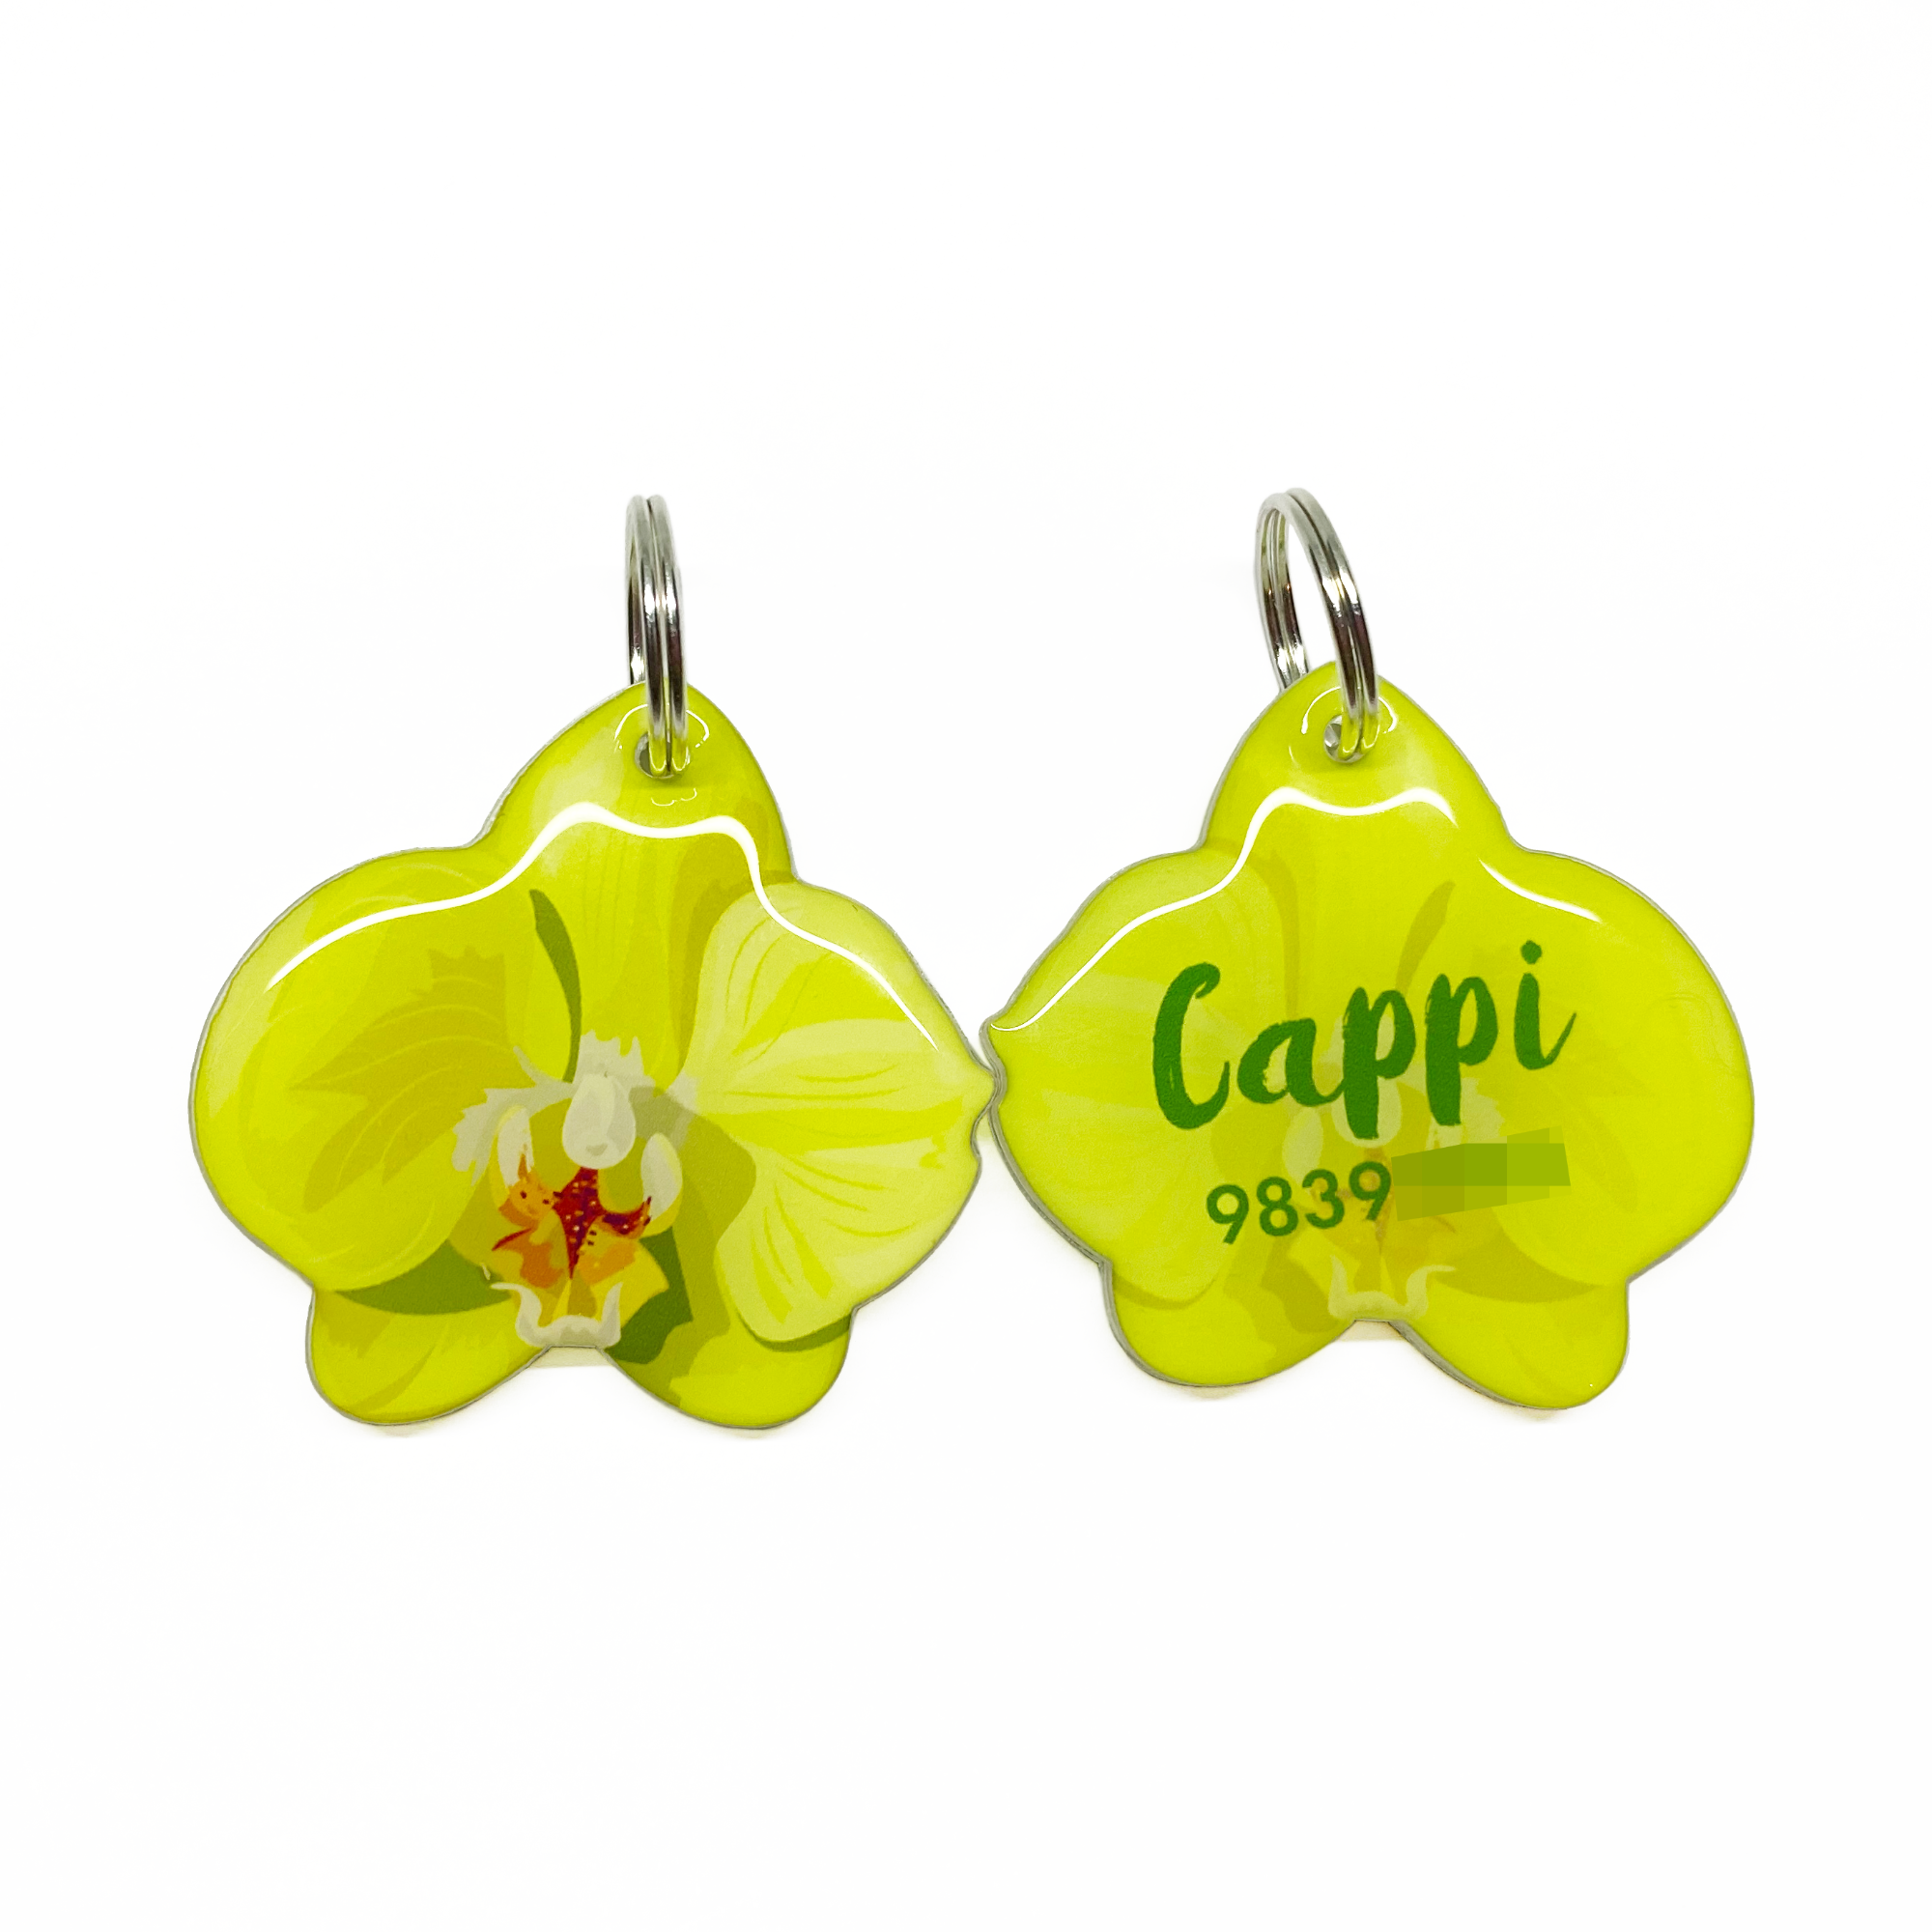 Key Lime Orchid - 2x Tags Dog Name Tags by Bashtags